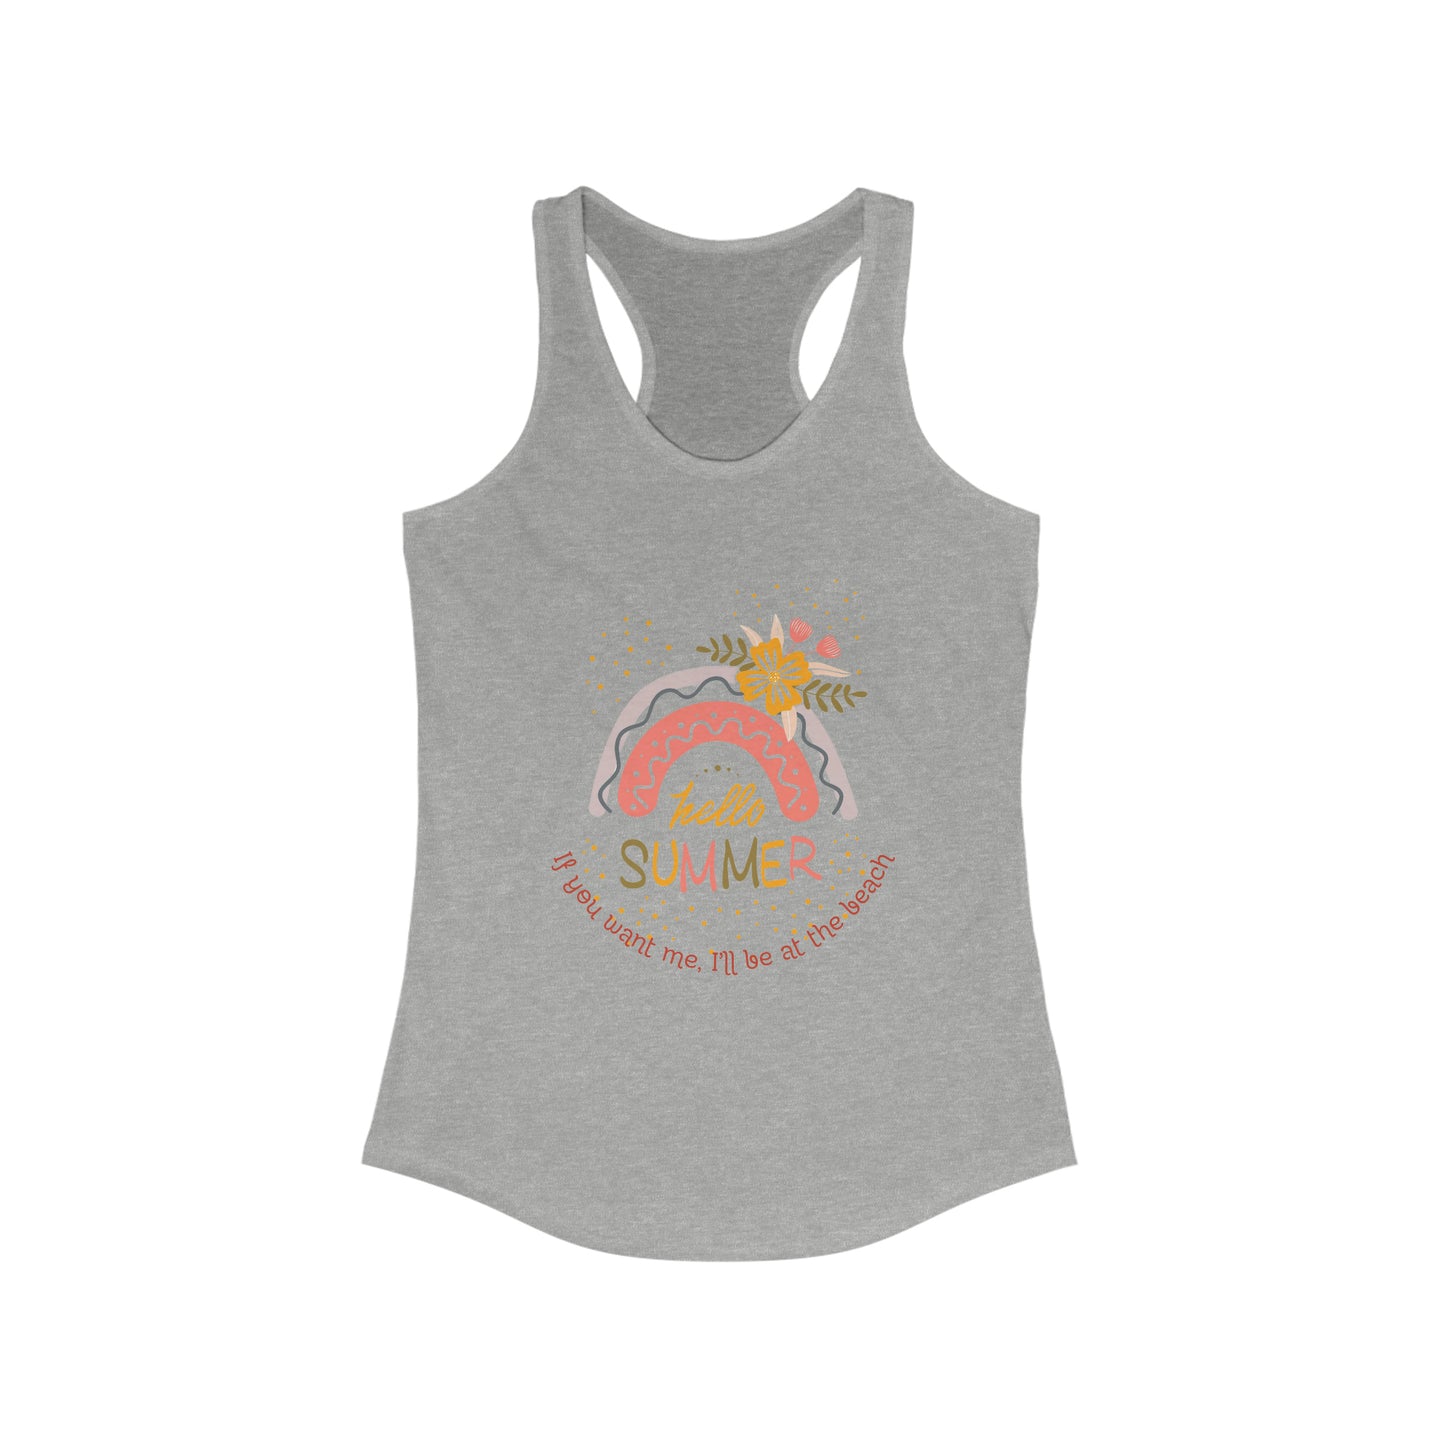 ‘If you want me, I’ll be at the beach’ Printed Front & Back. Women's Ideal Racerback Tank